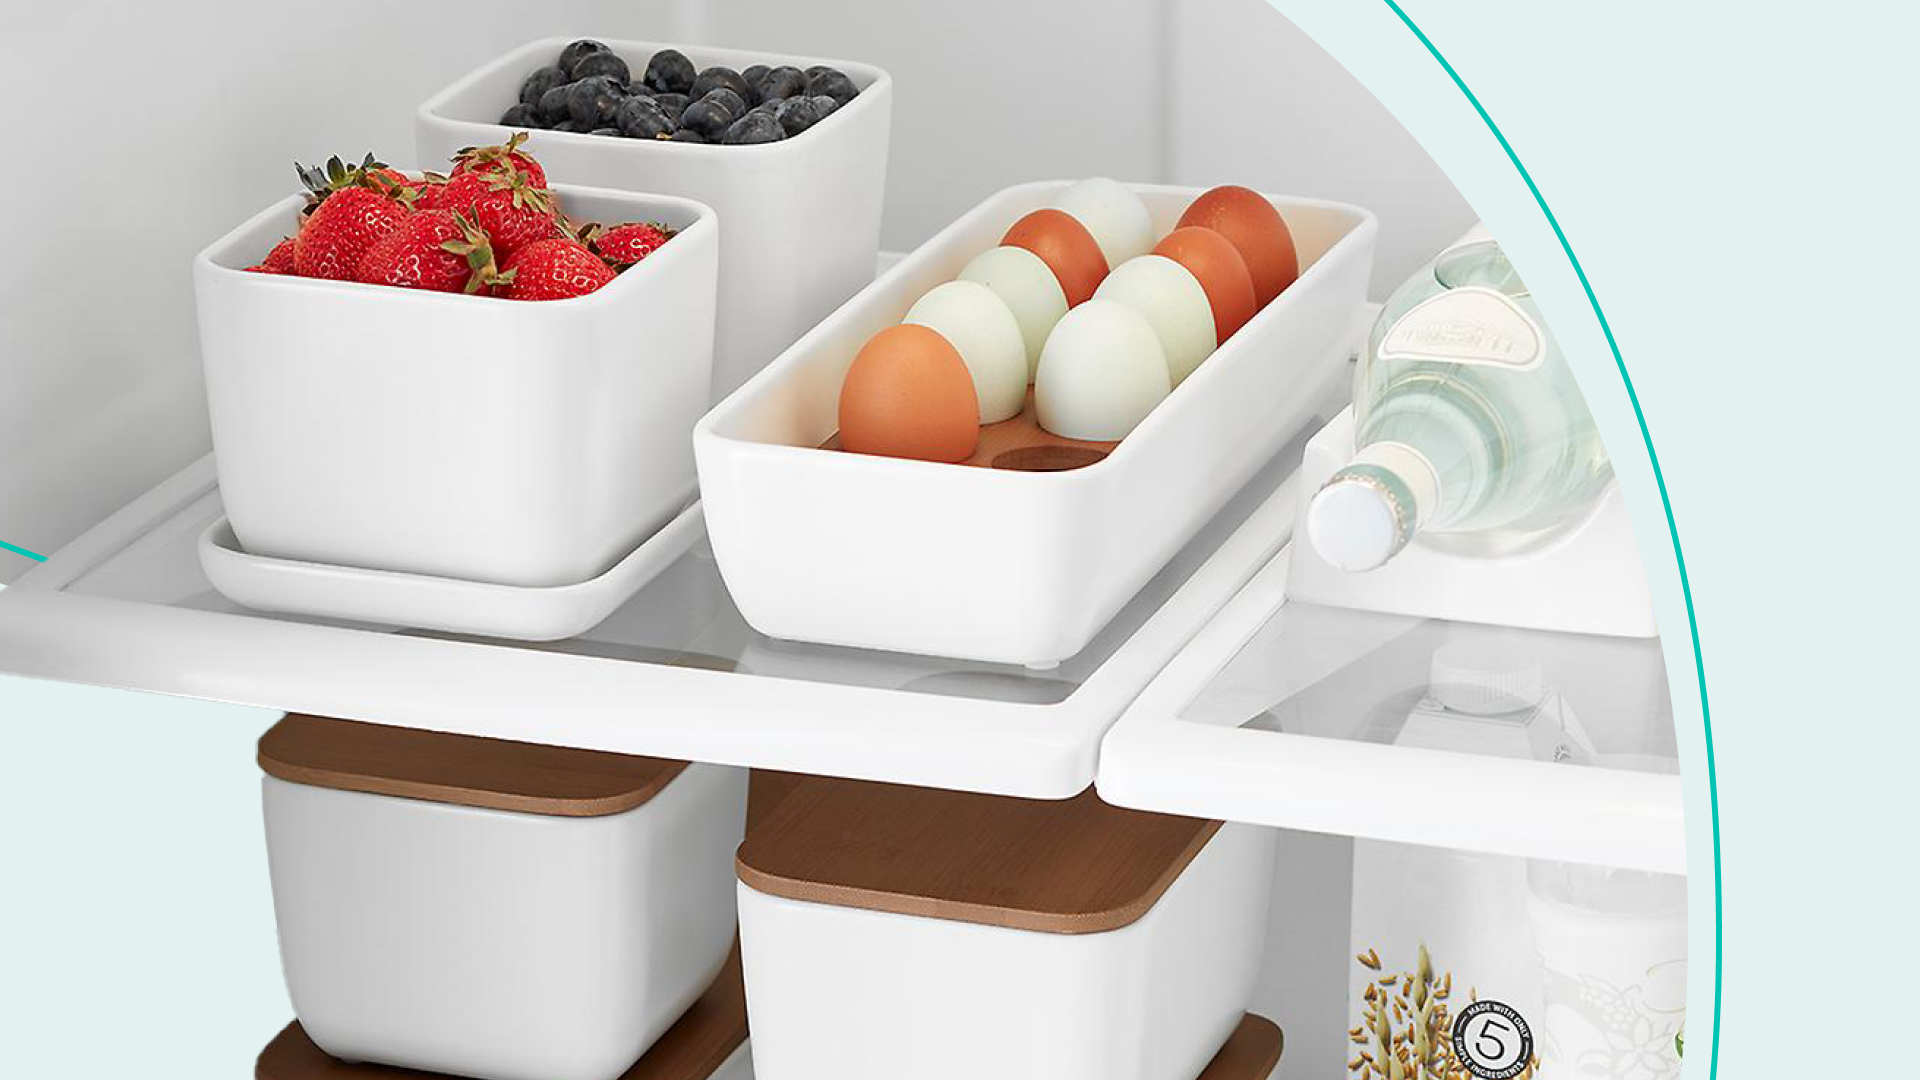 Fruit Storage Containers for Fridge with Removable Colanders, Dishwasher  Safe, Produce Saver Containers for Refrigerator to Keep different Berry,  Fruits, Vegetables, Meat Fresher Longer 